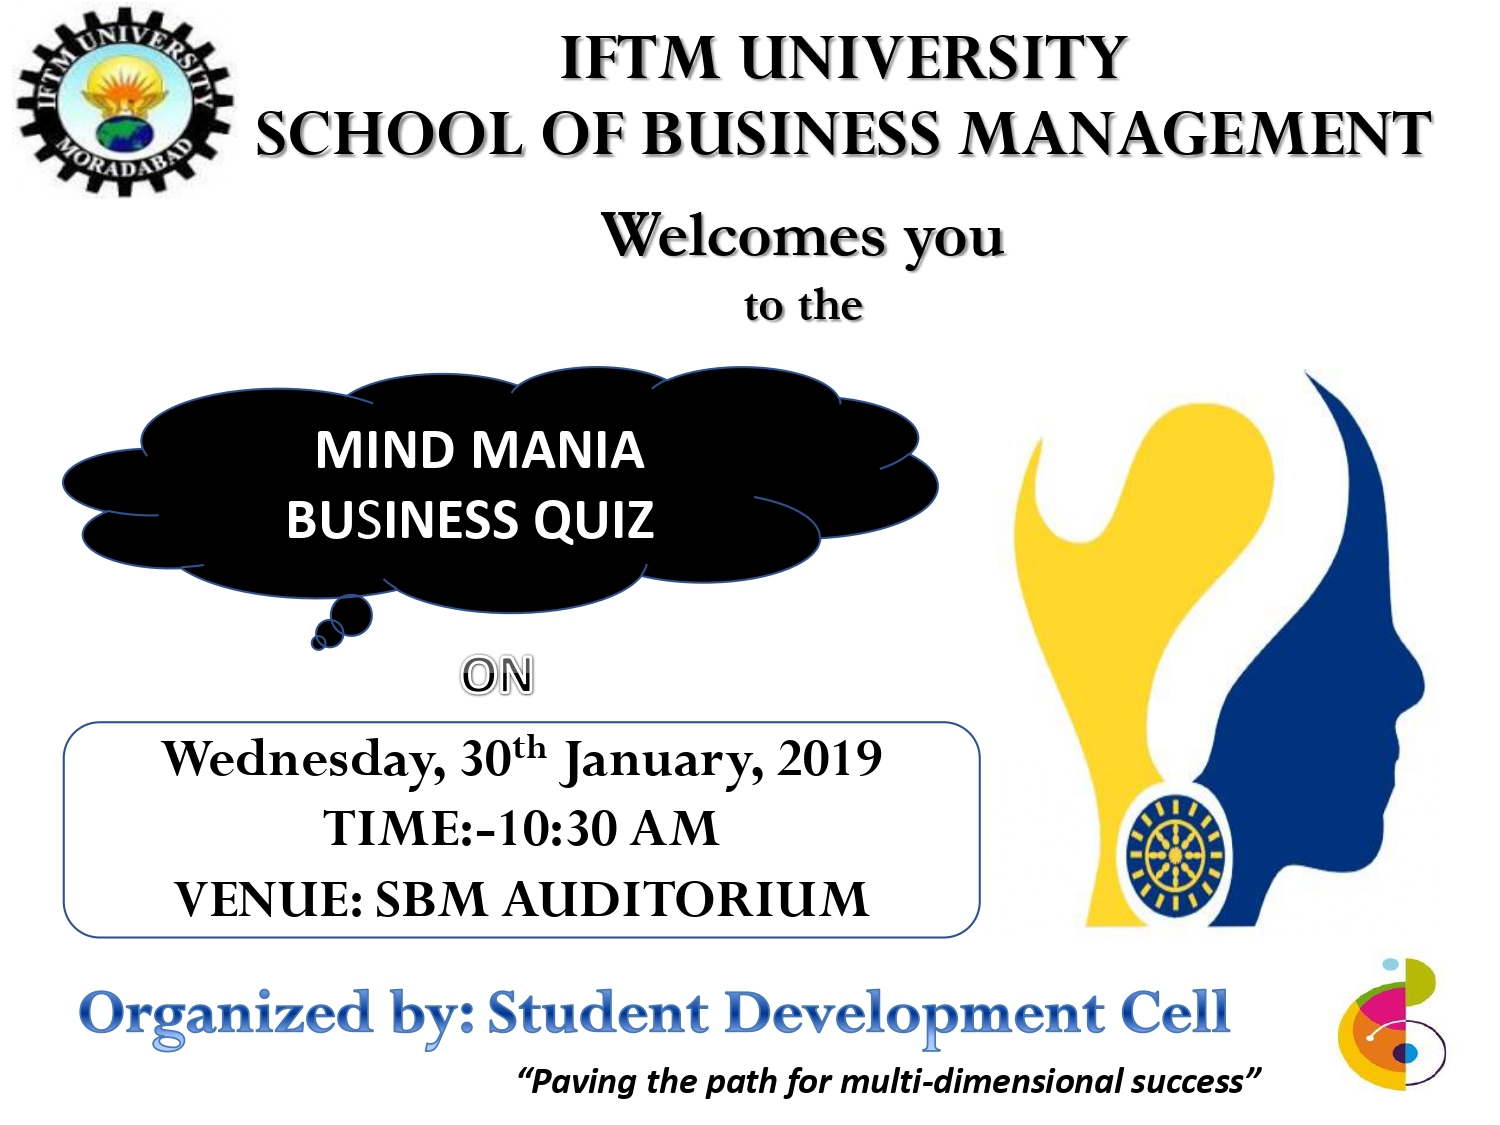 “MIND MANIA- The Business Quiz Competition”